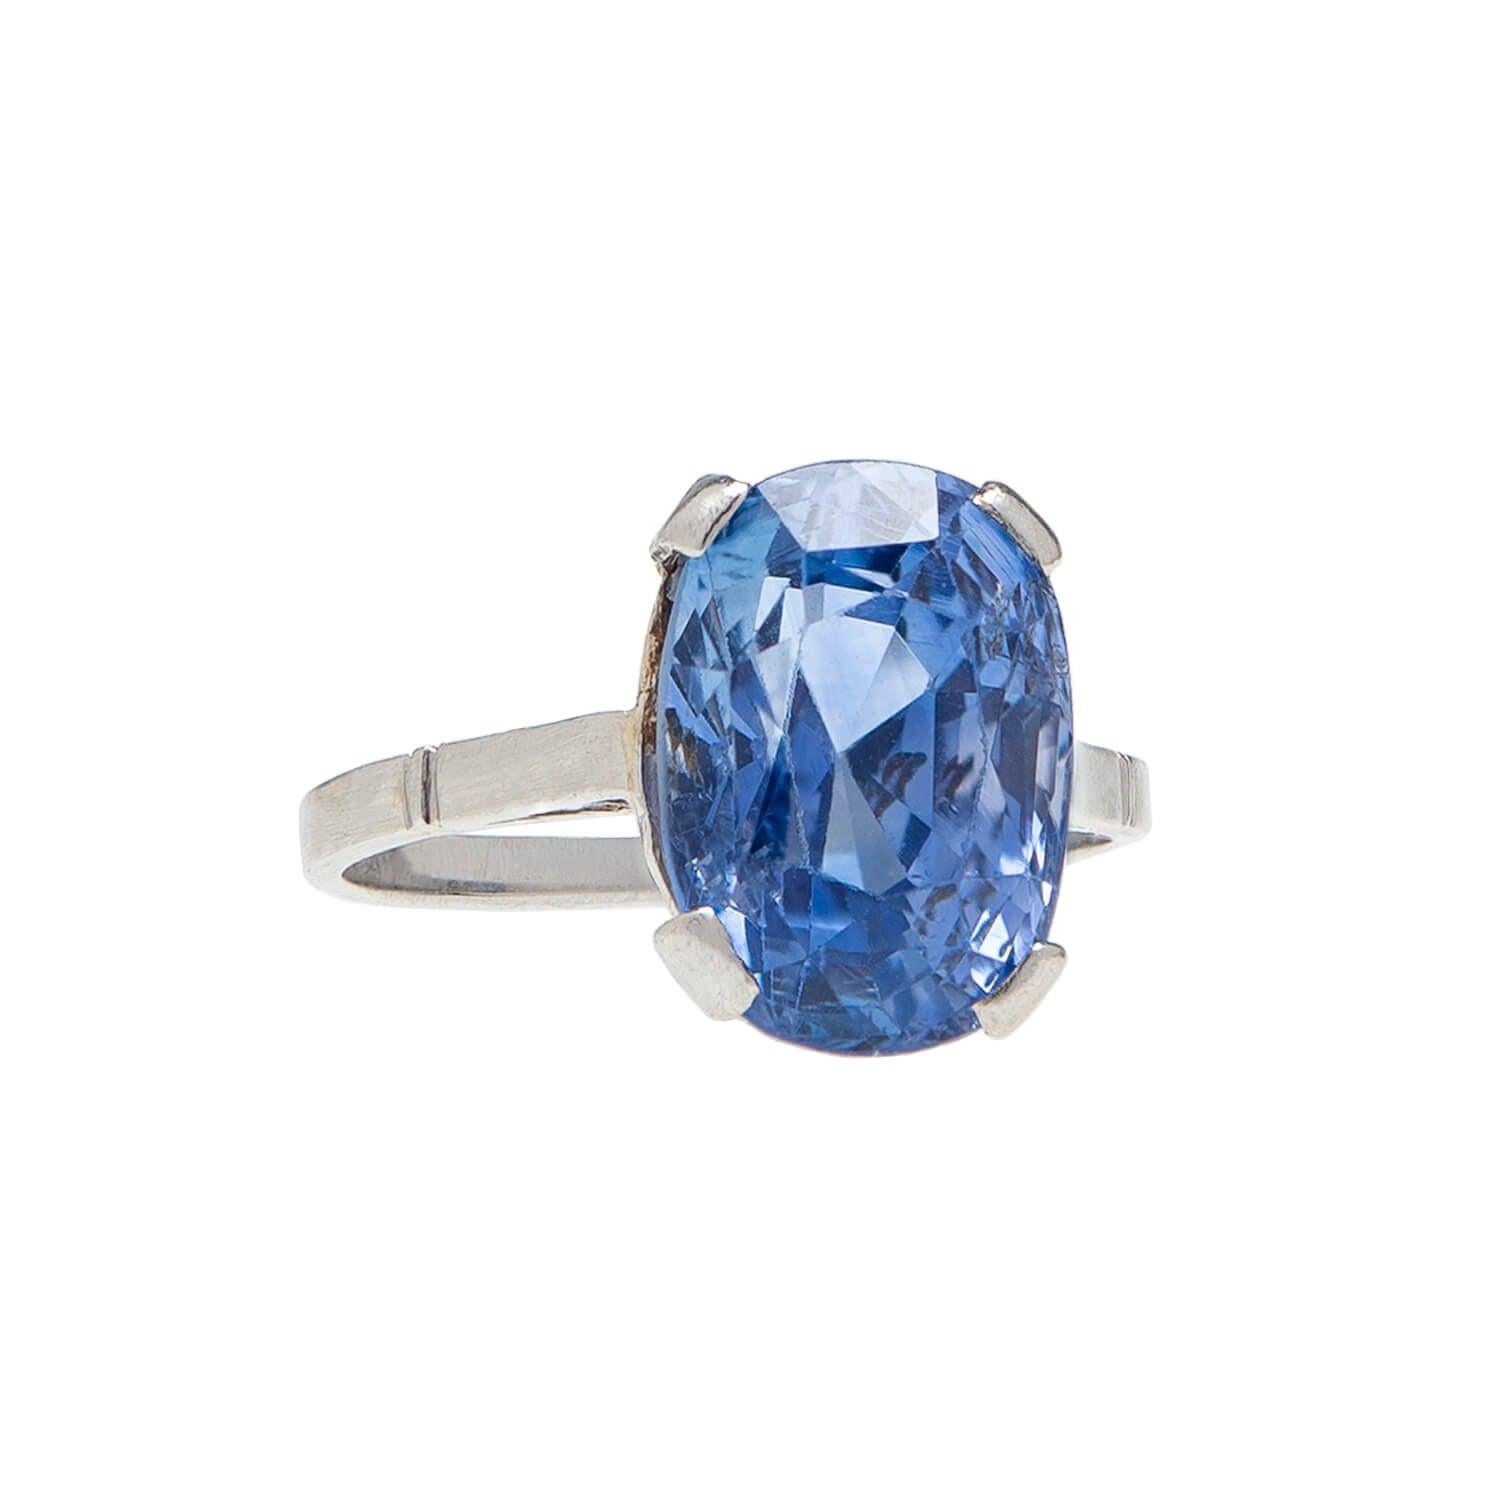 An exquisite sapphire ring from the Art Deco (ca1930) era! This stunning piece is crafted in platinum and holds an incredible natural sapphire at the center of a classically simple prong setting. The four prong set Ceylon (Sri Lankan) sapphire has